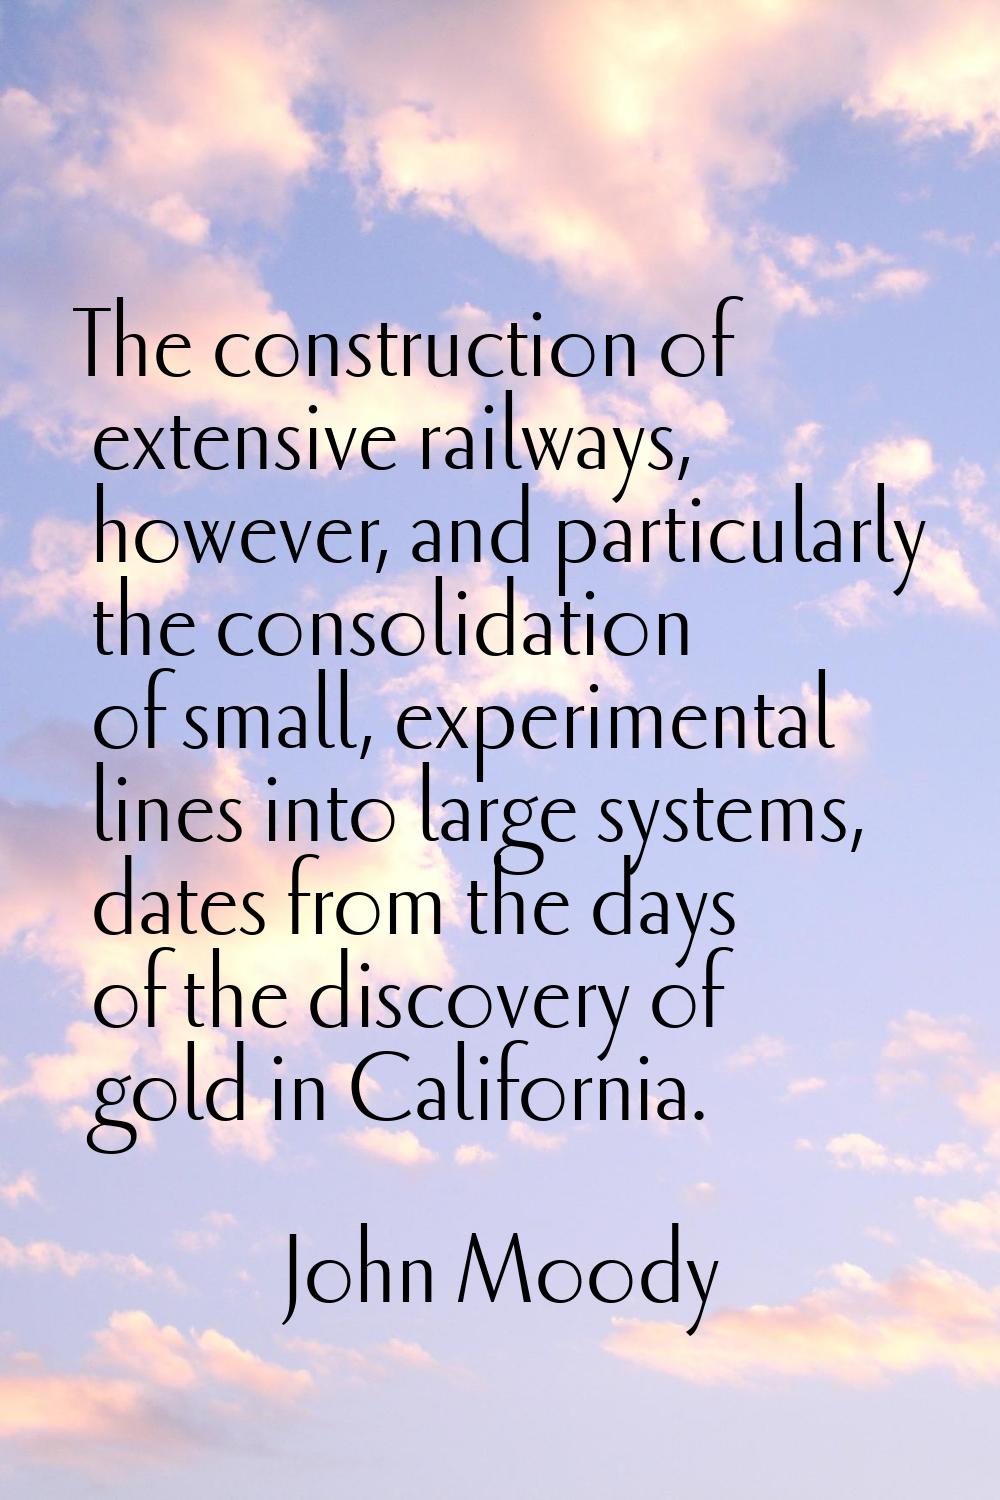 The construction of extensive railways, however, and particularly the consolidation of small, exper